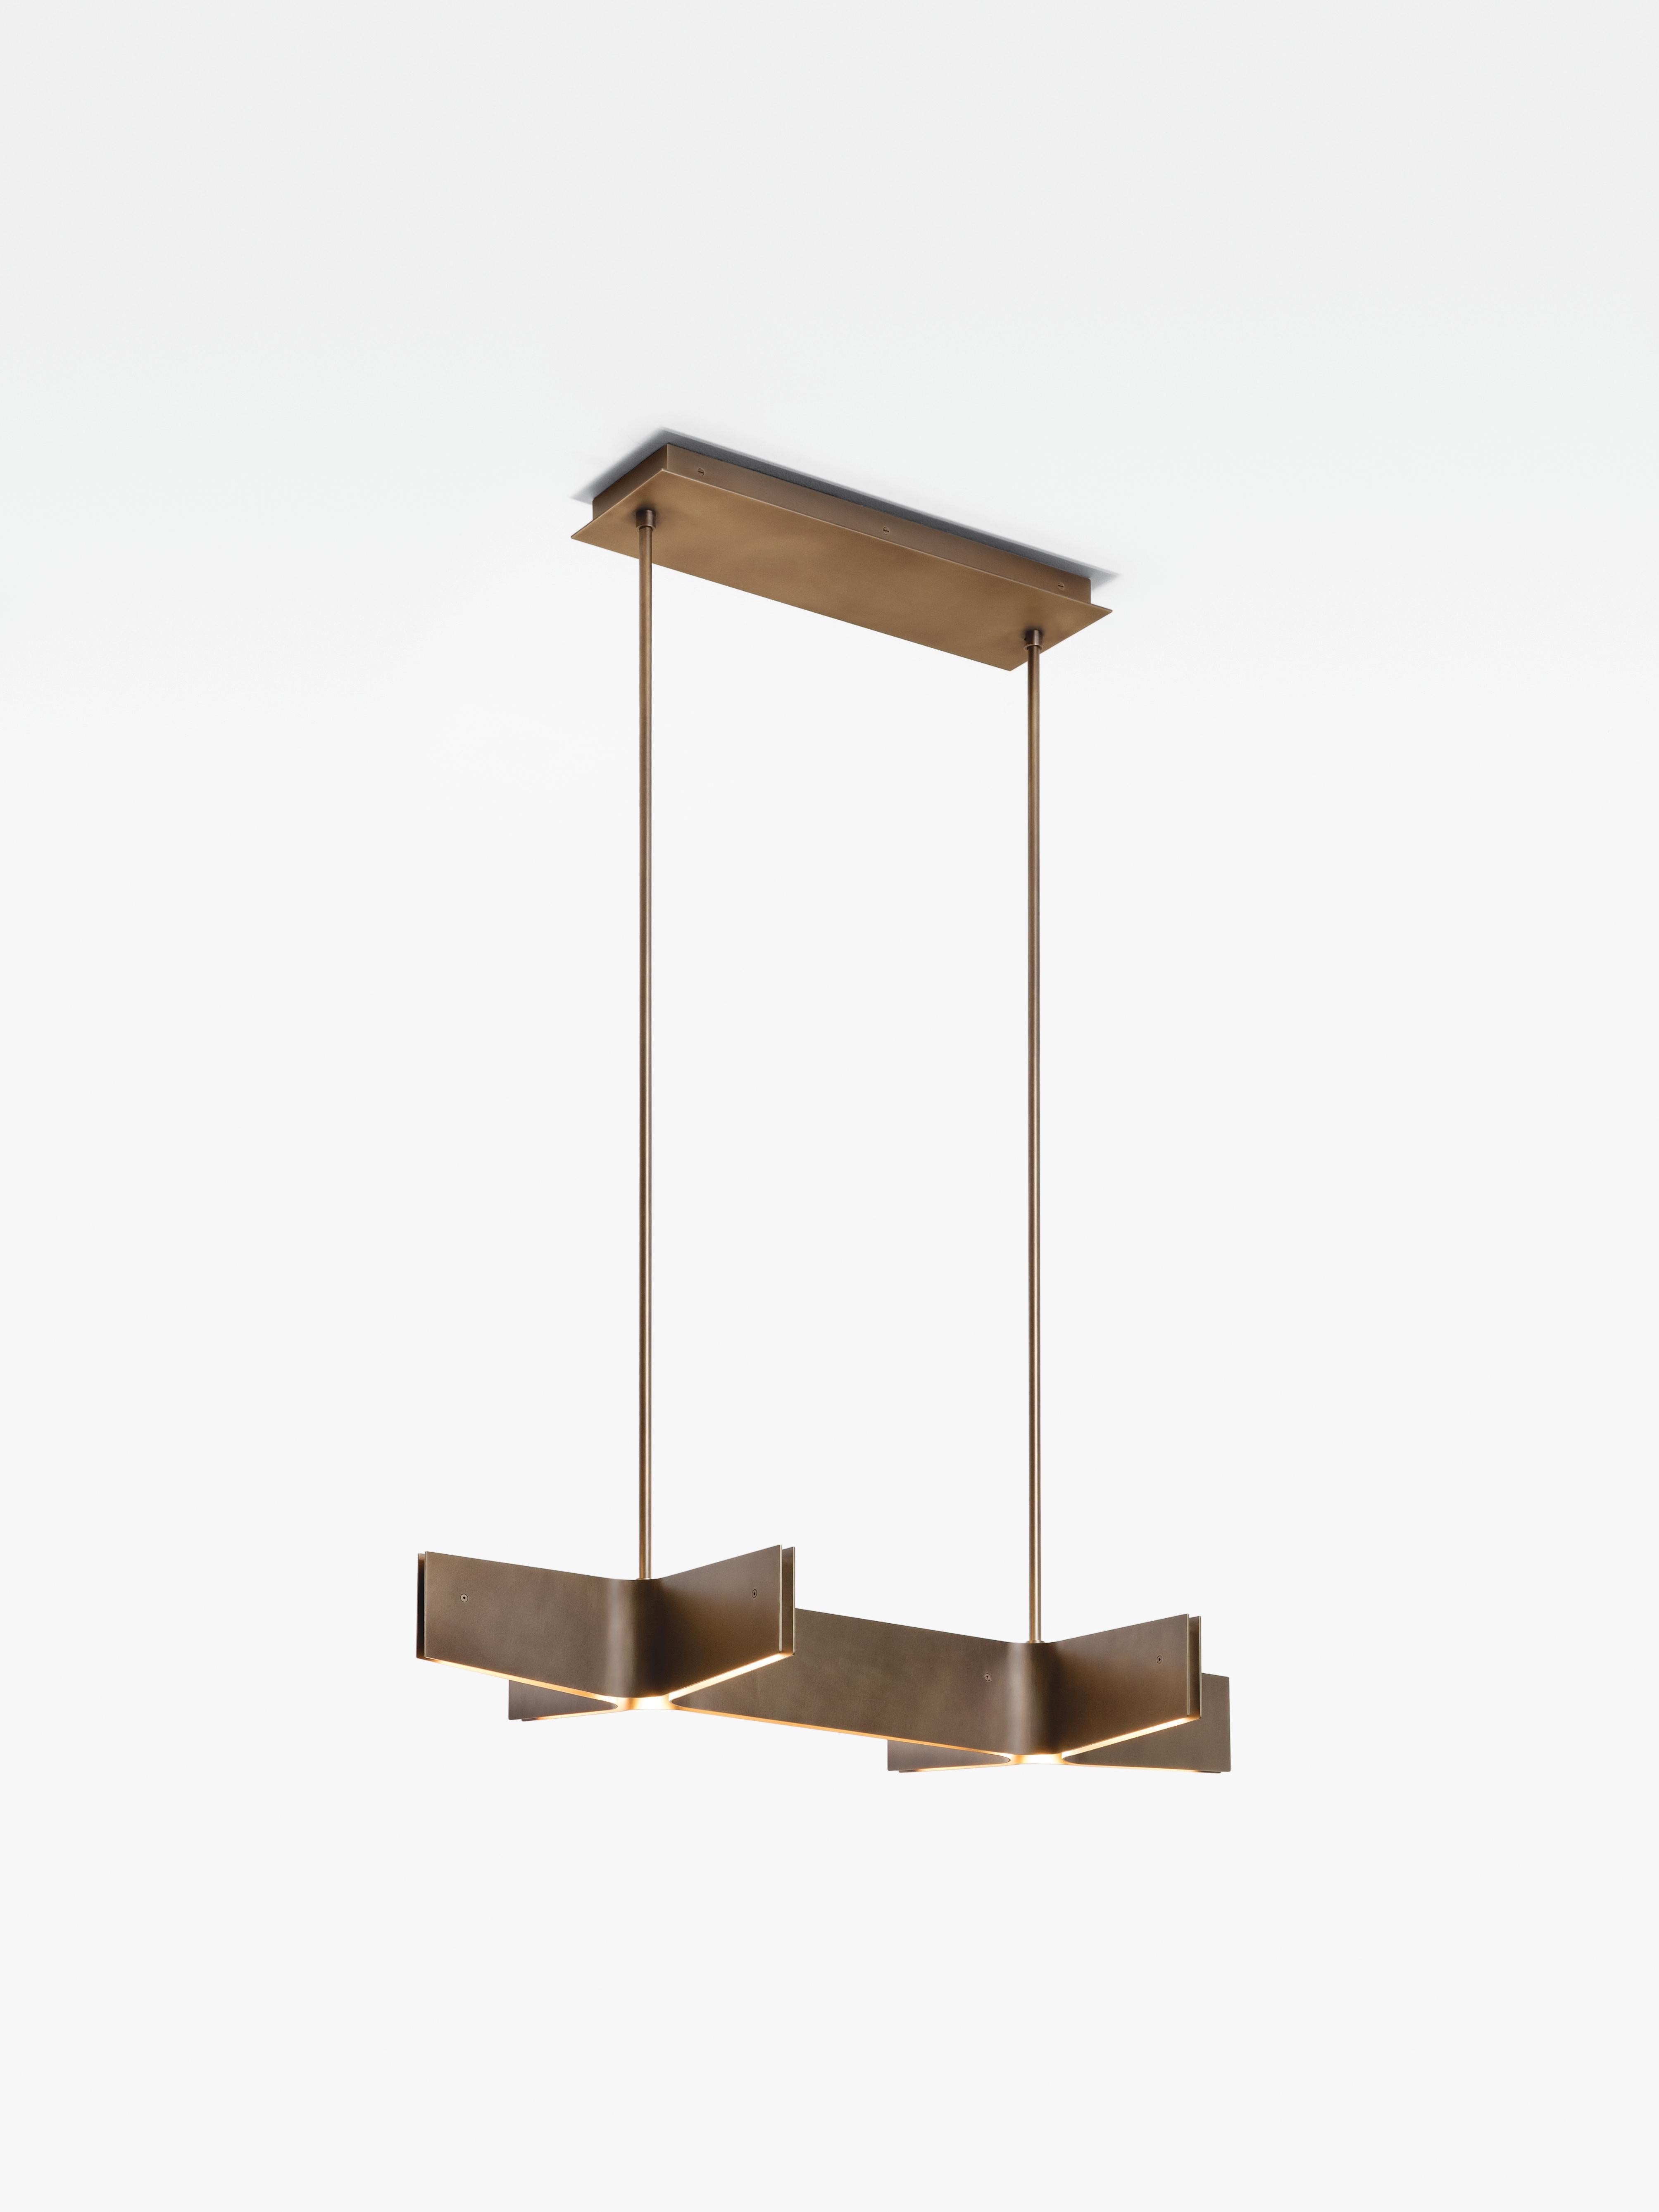 HOLLY HUNT Spanning hanging light with light bronze patina finish. A sleek minimal hanging light, ideal over a kitchen island, dining table or living space. Features task and ambient lighting for your interior.


Additional Information:
Structure: